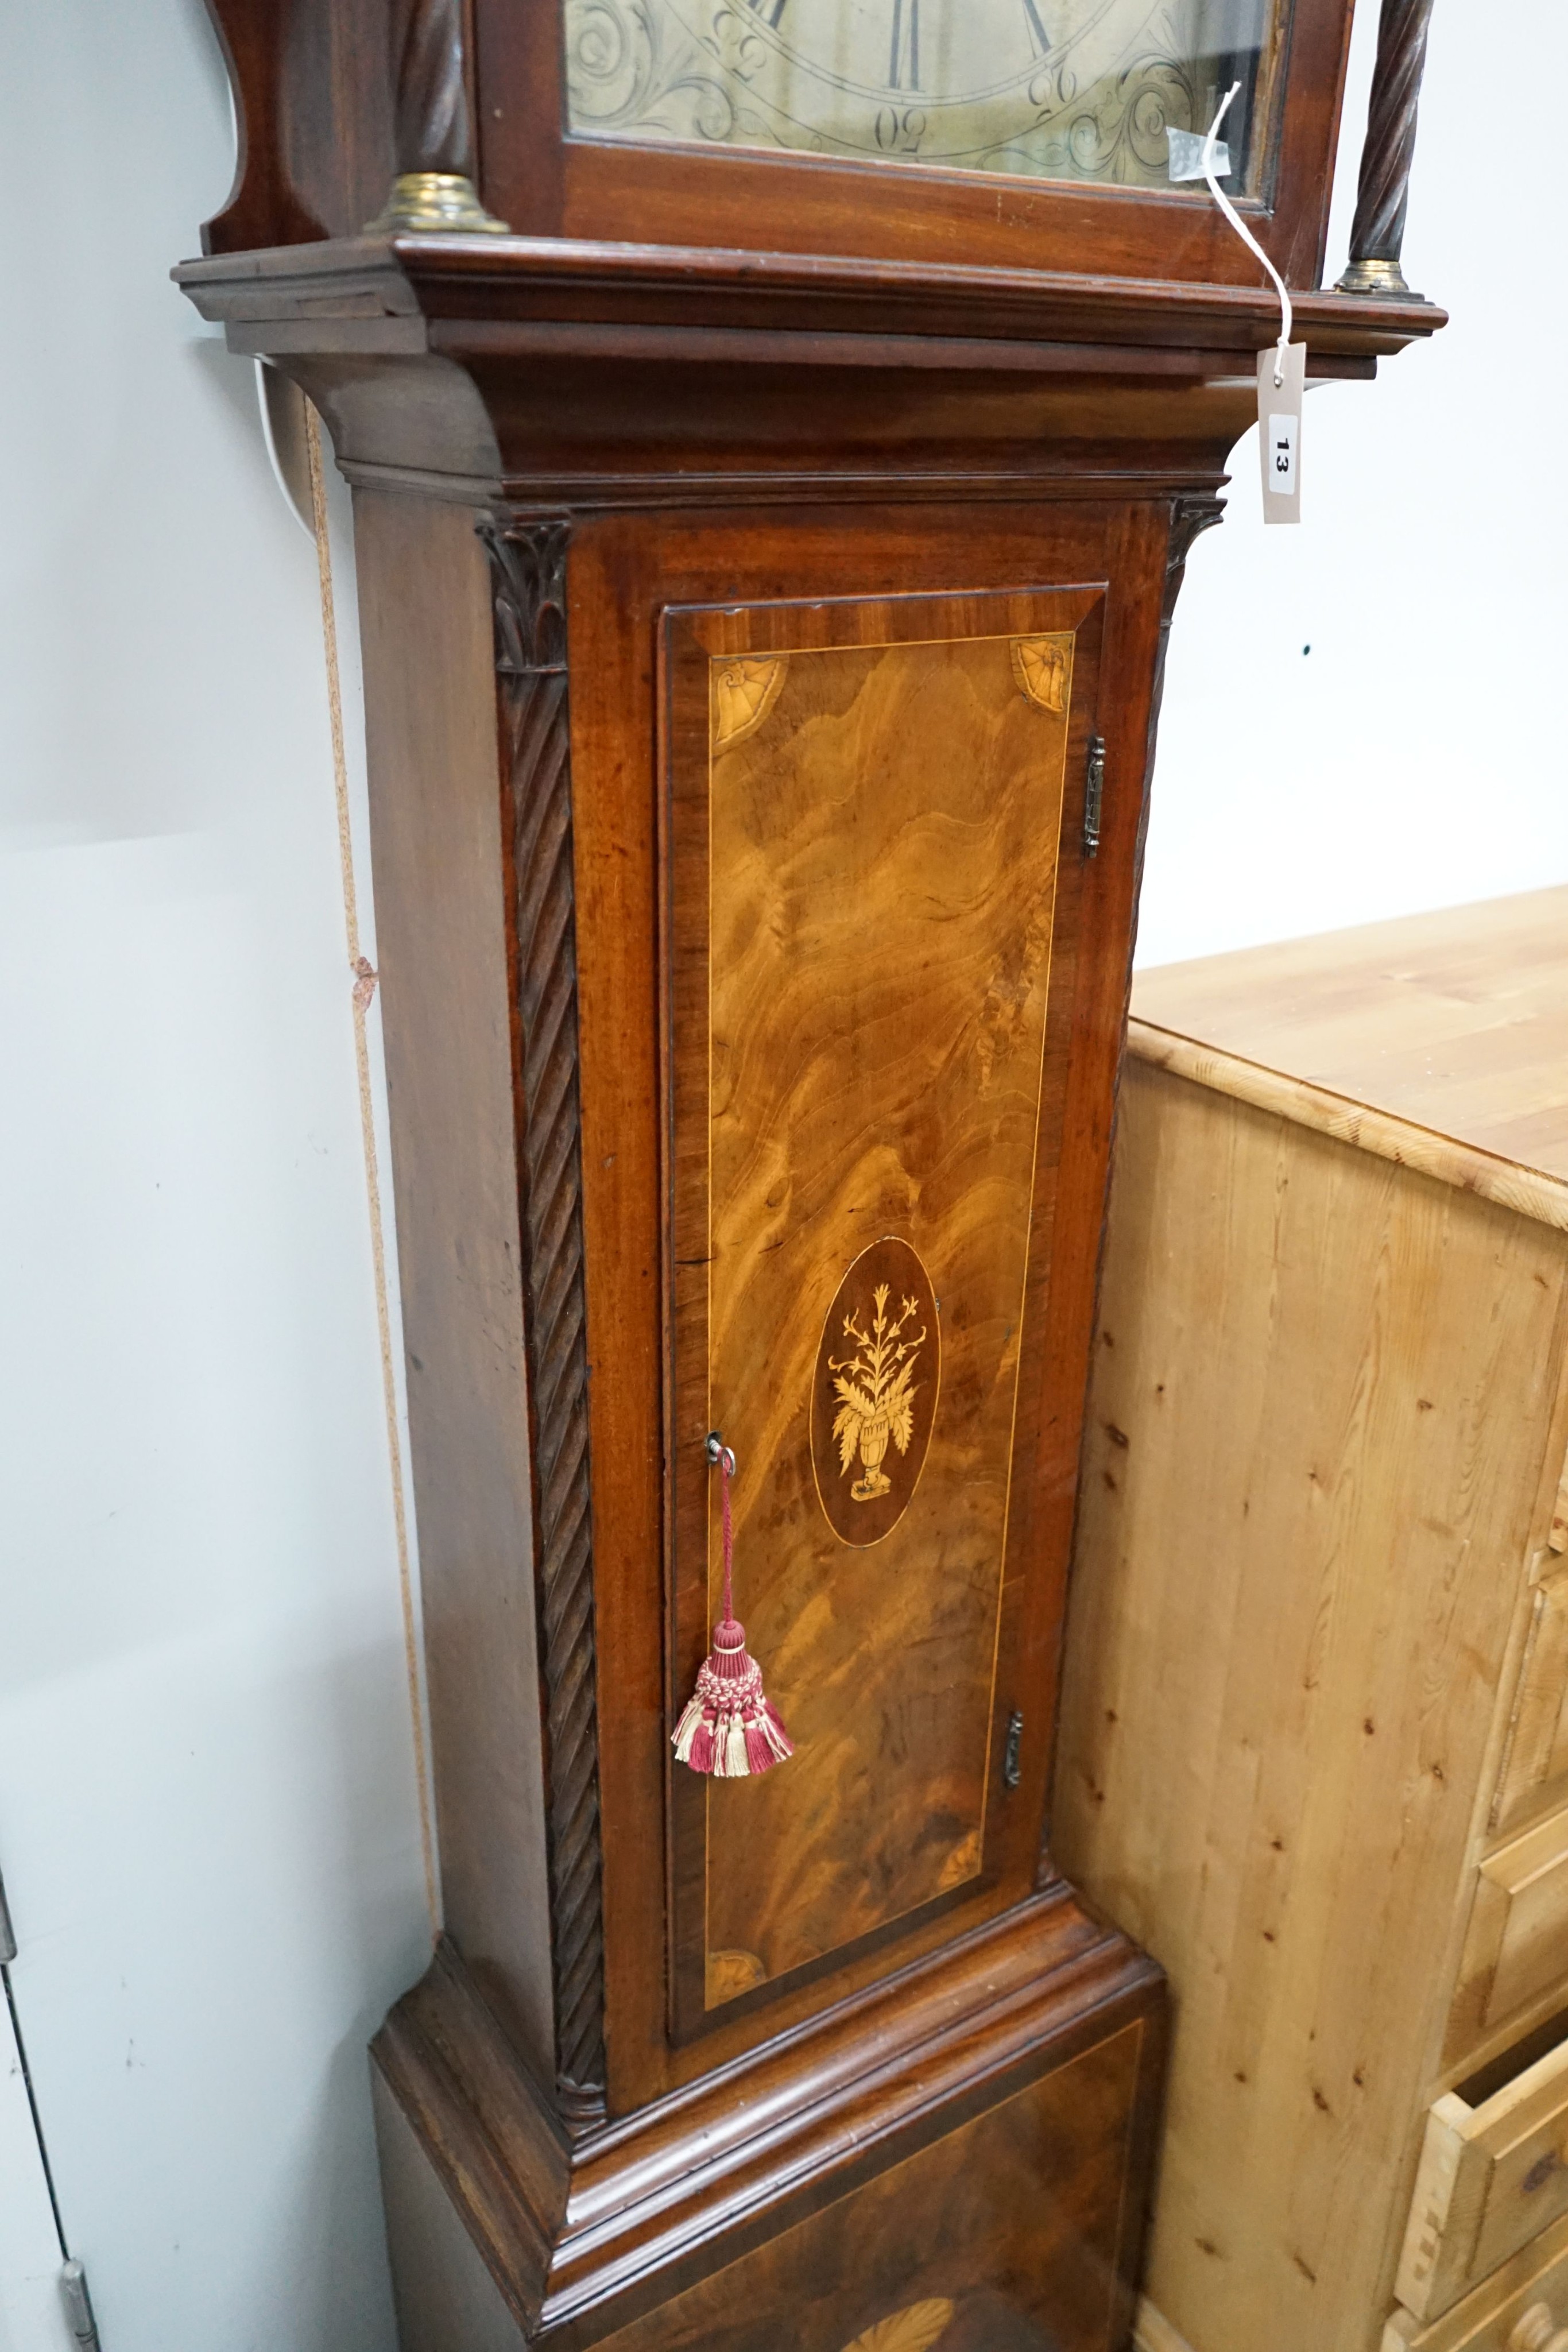 A George III inlaid mahogany 8 day longcase clock, marked Mitchell & Son, Gorbals, with key, pendulum and two weights, height 208cm